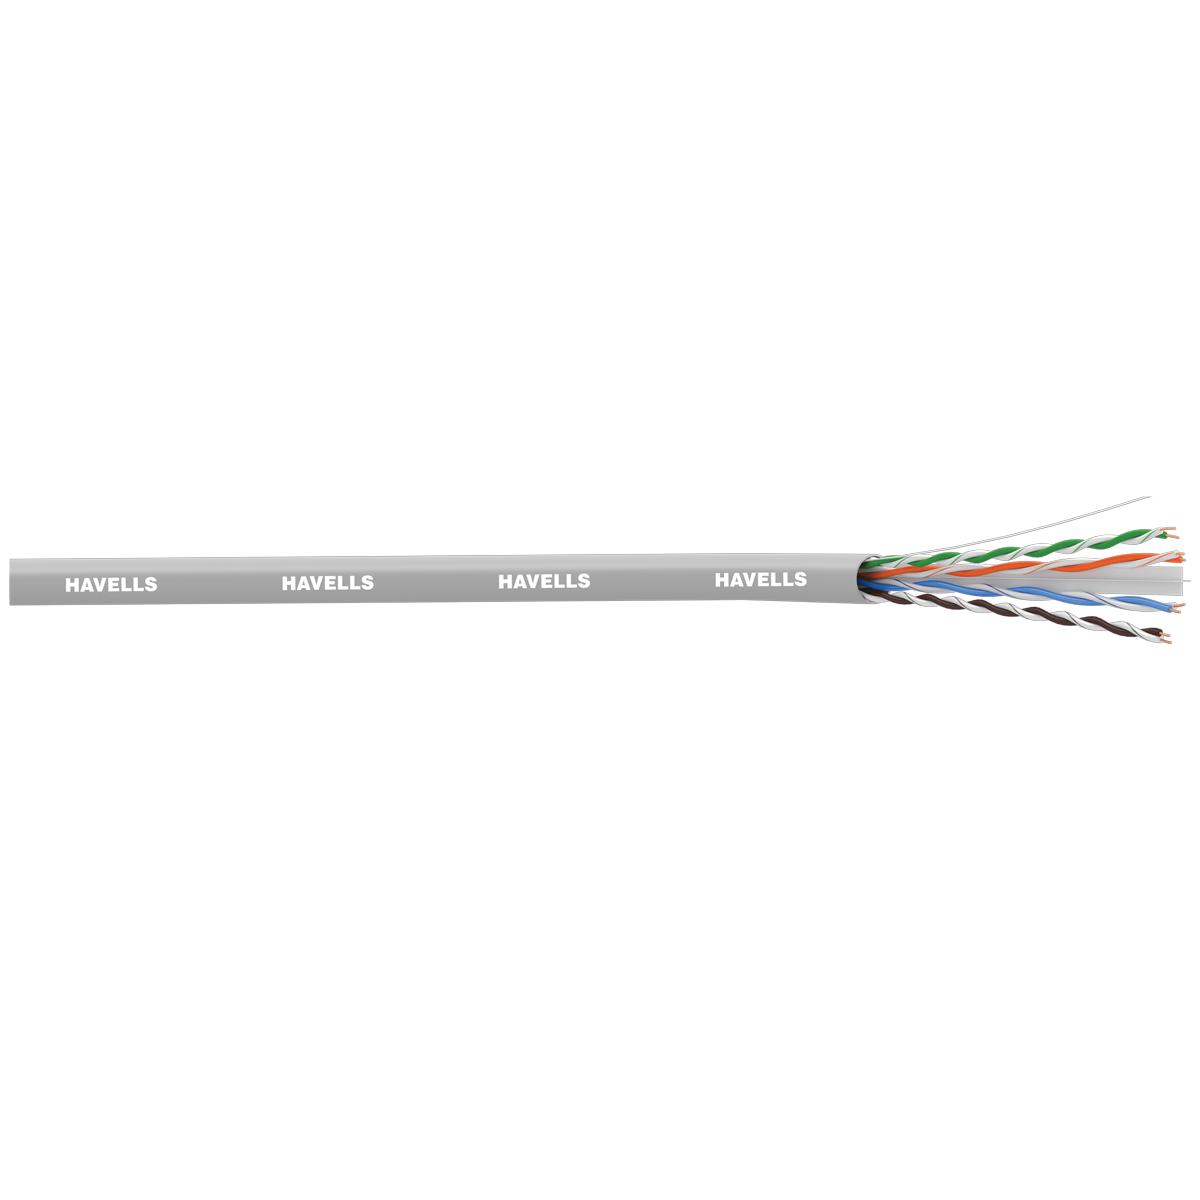 Havells Computer LAN Network Cable Electrolytic Grade Solid Annealed Bare Copper Conductor Cable 100m